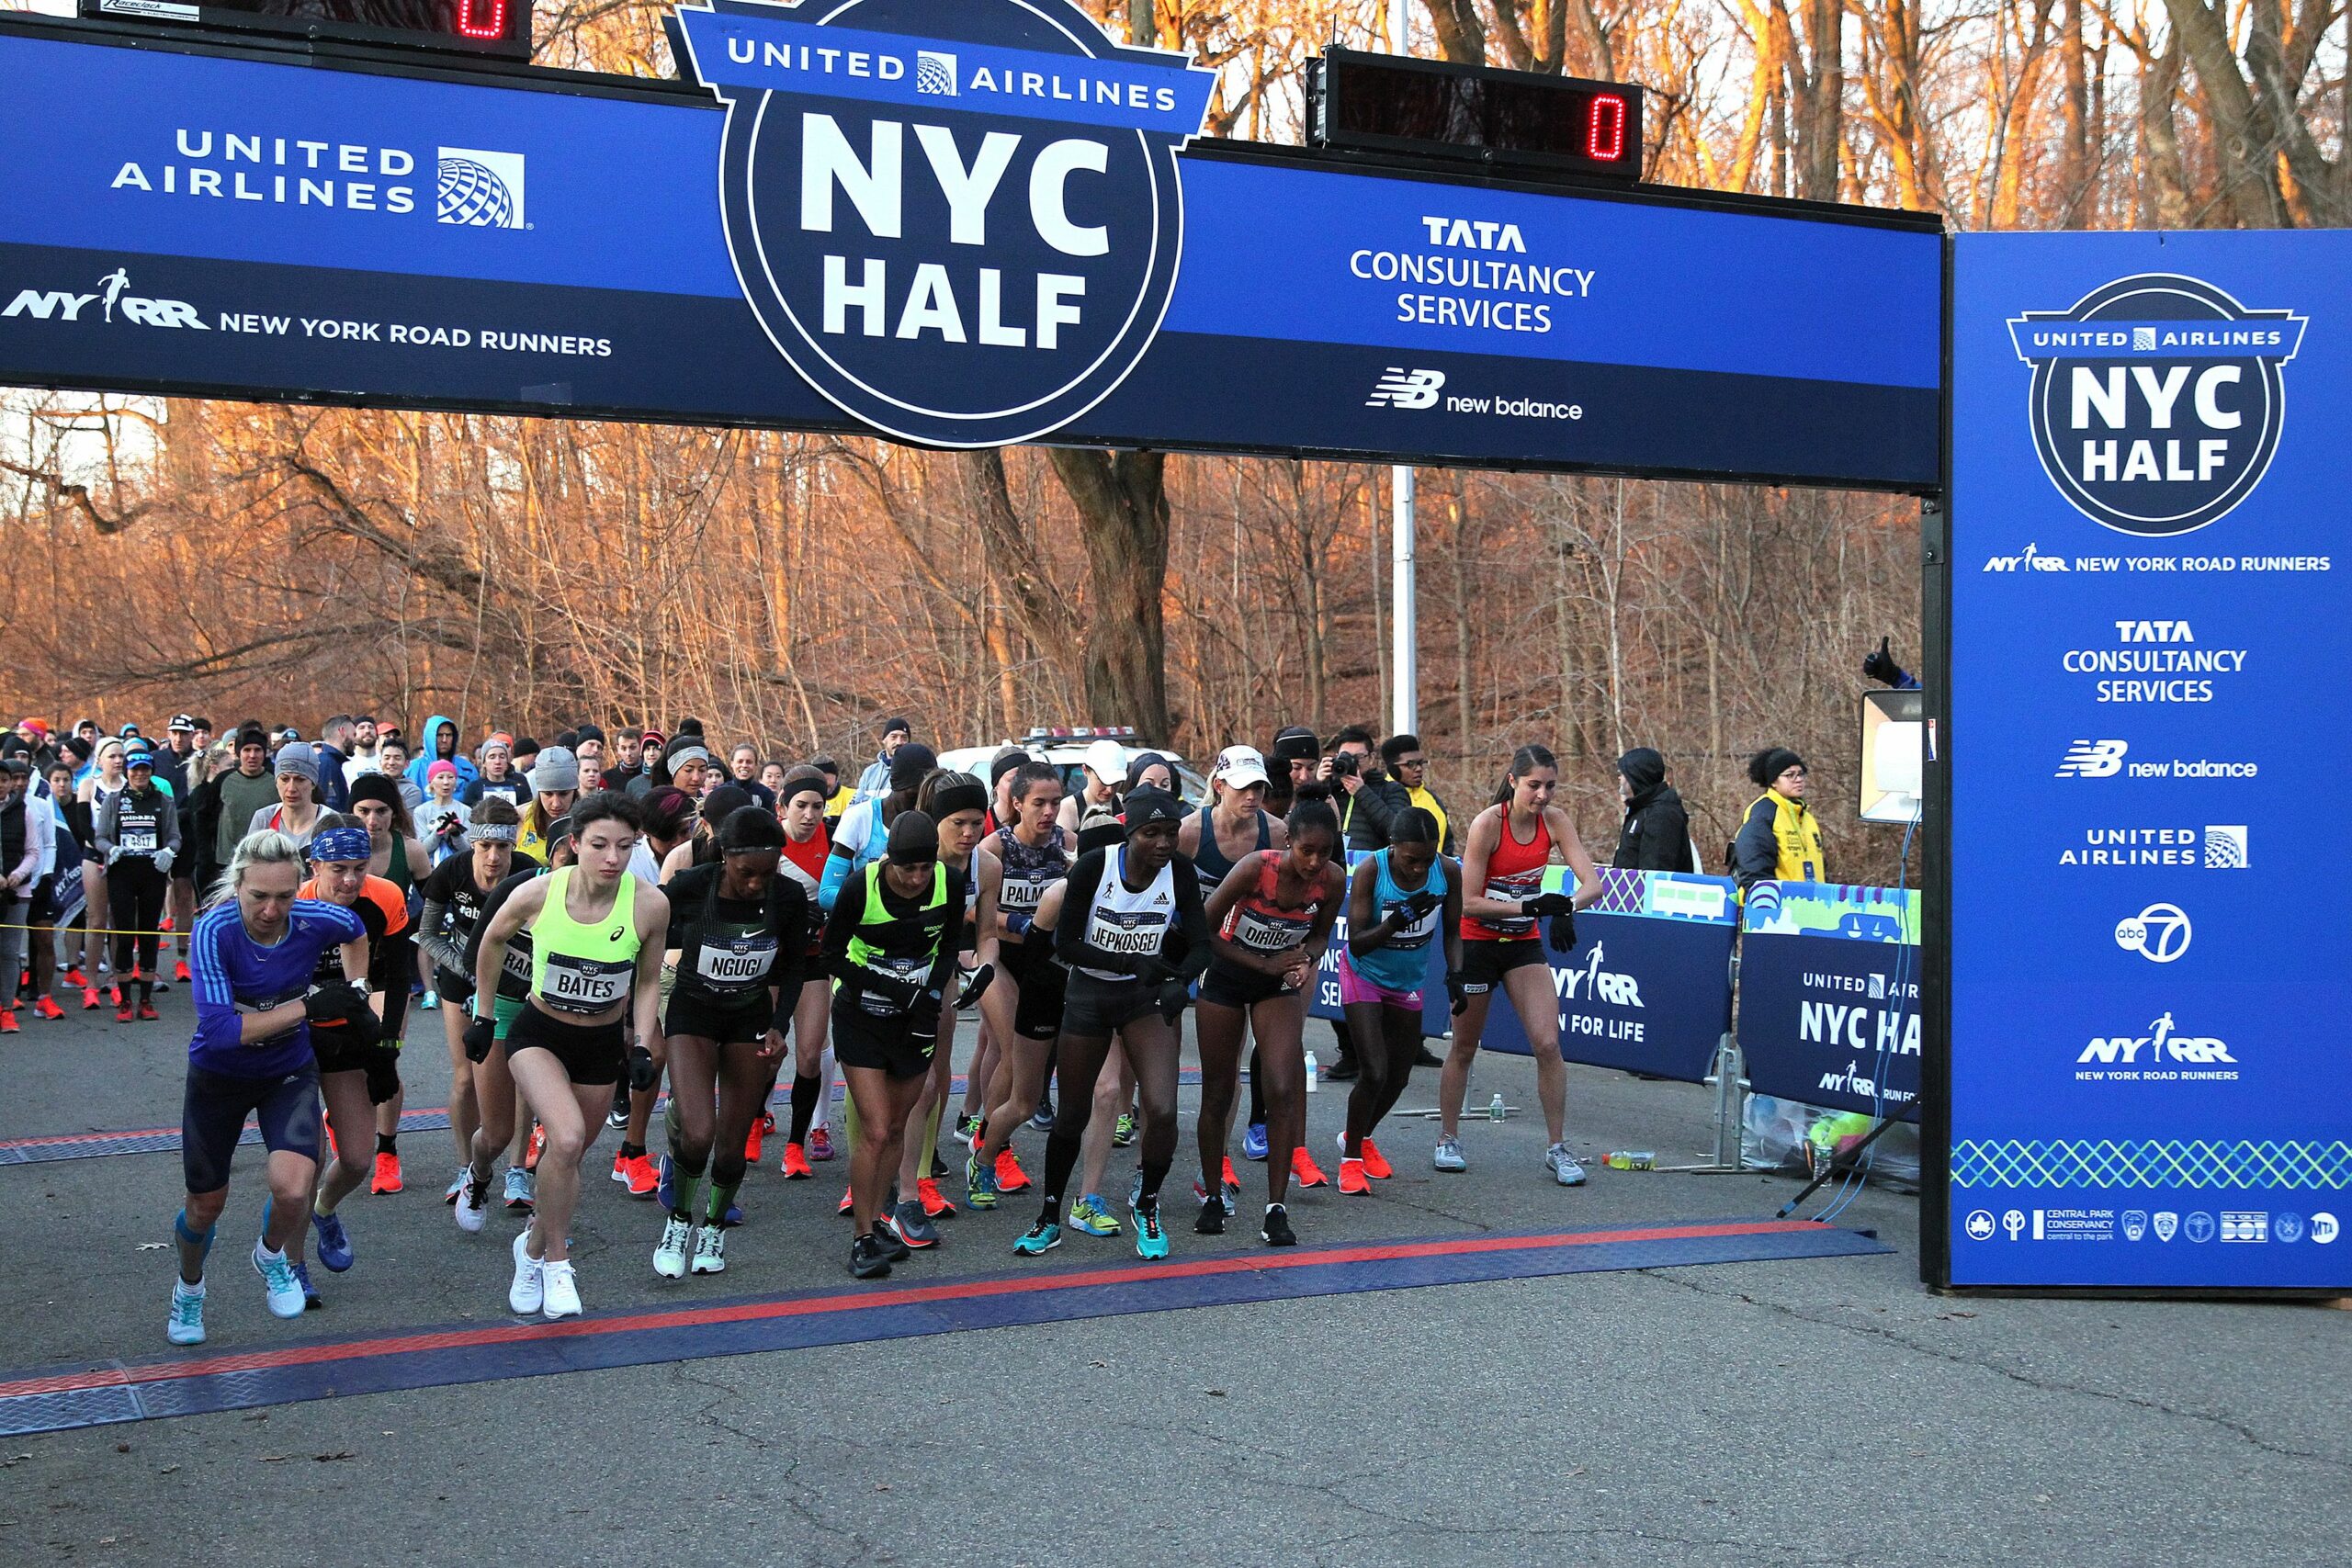 The 2019 United Airlines NYC Half.